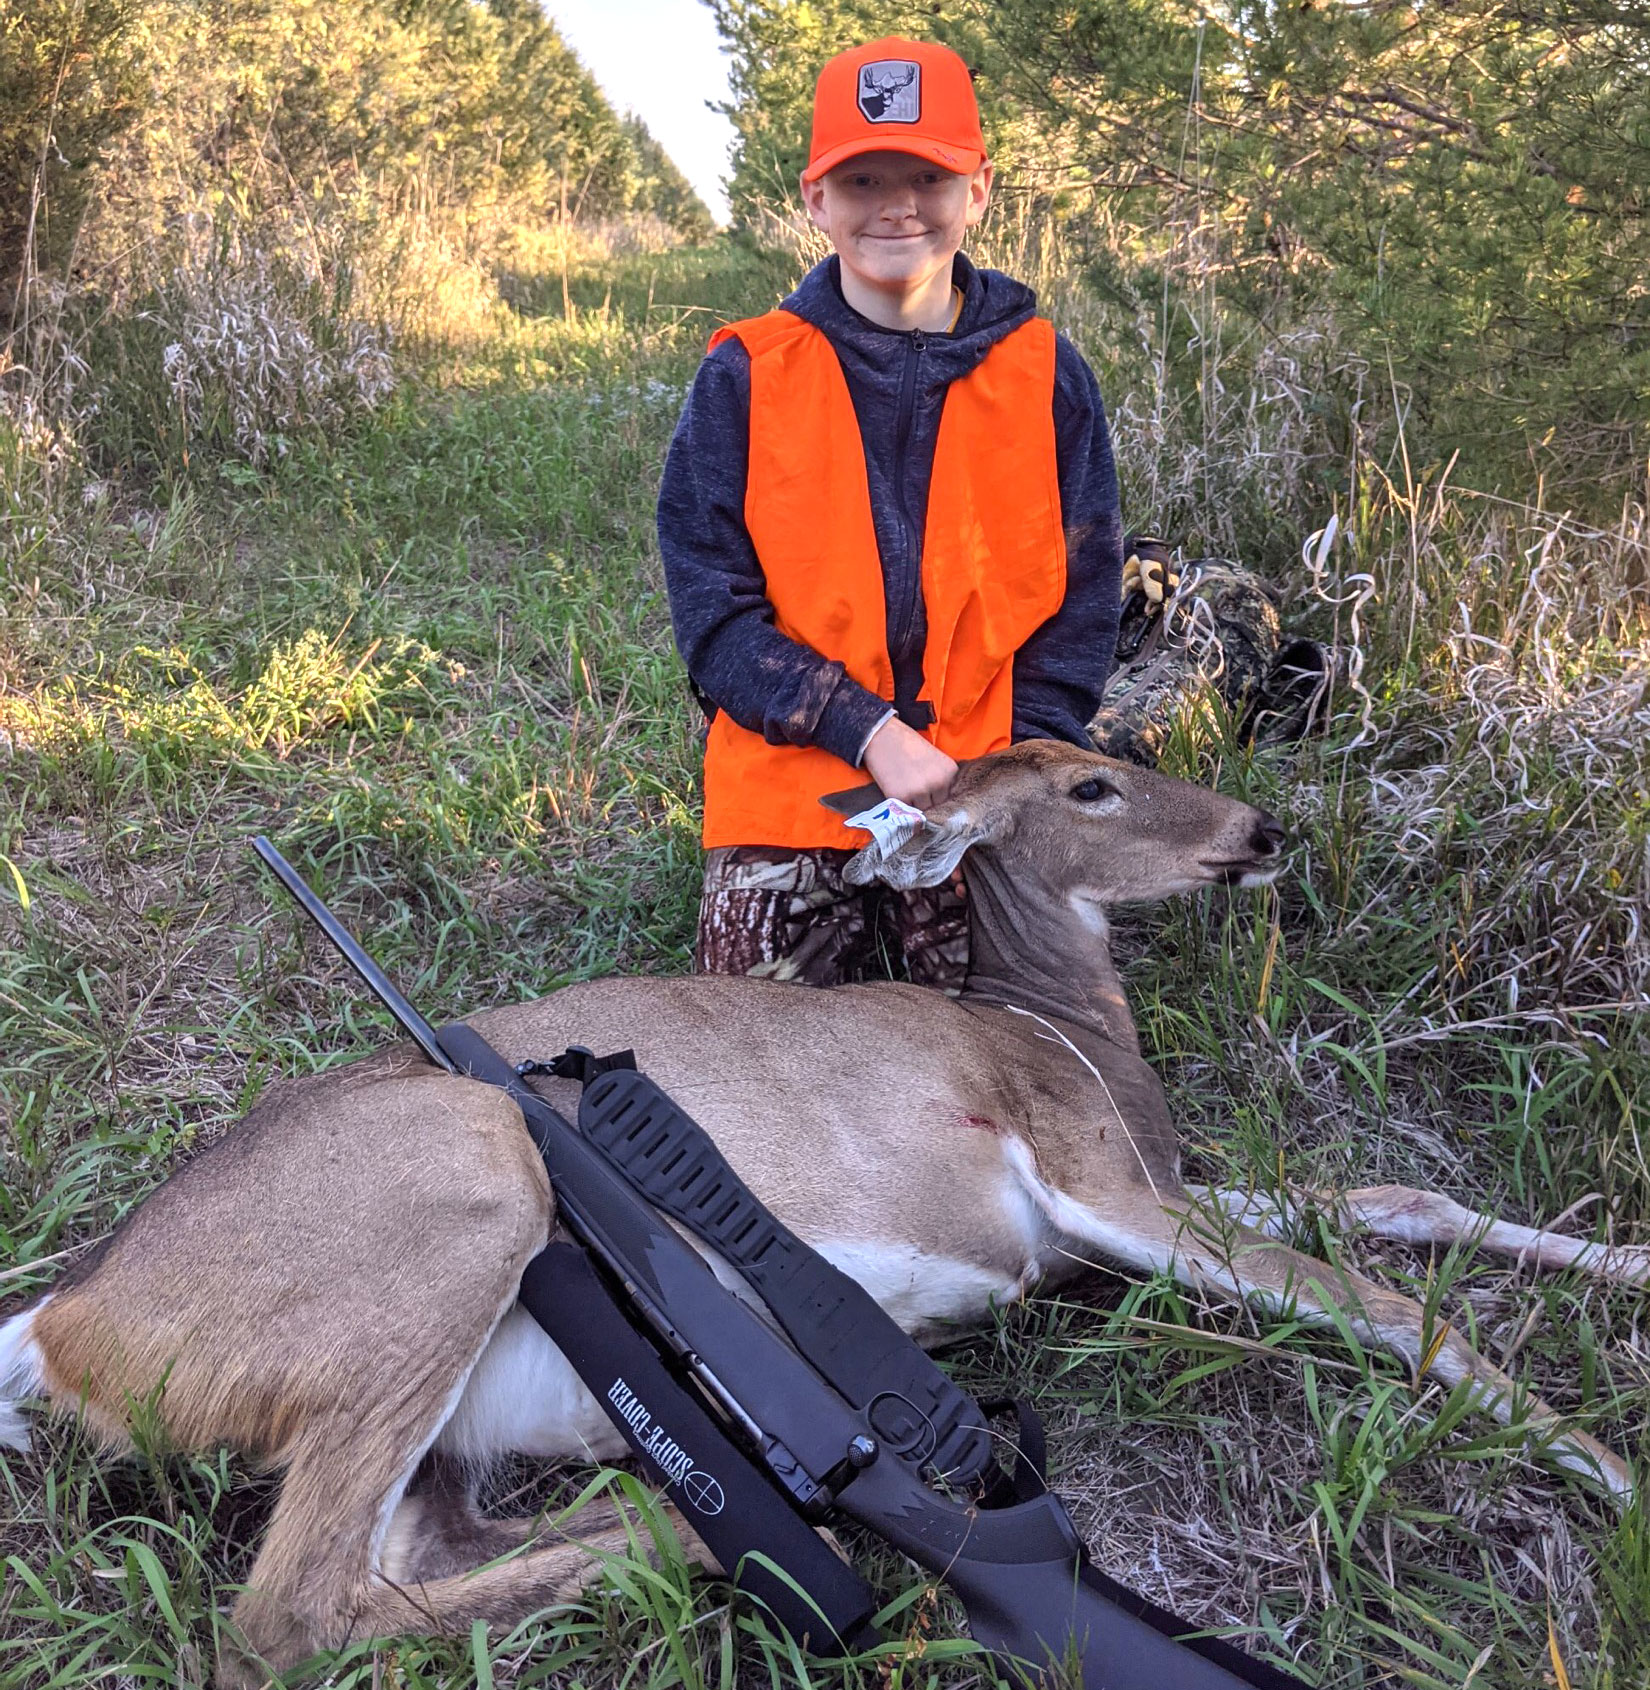 Jesper Anderson with his first deer harvested